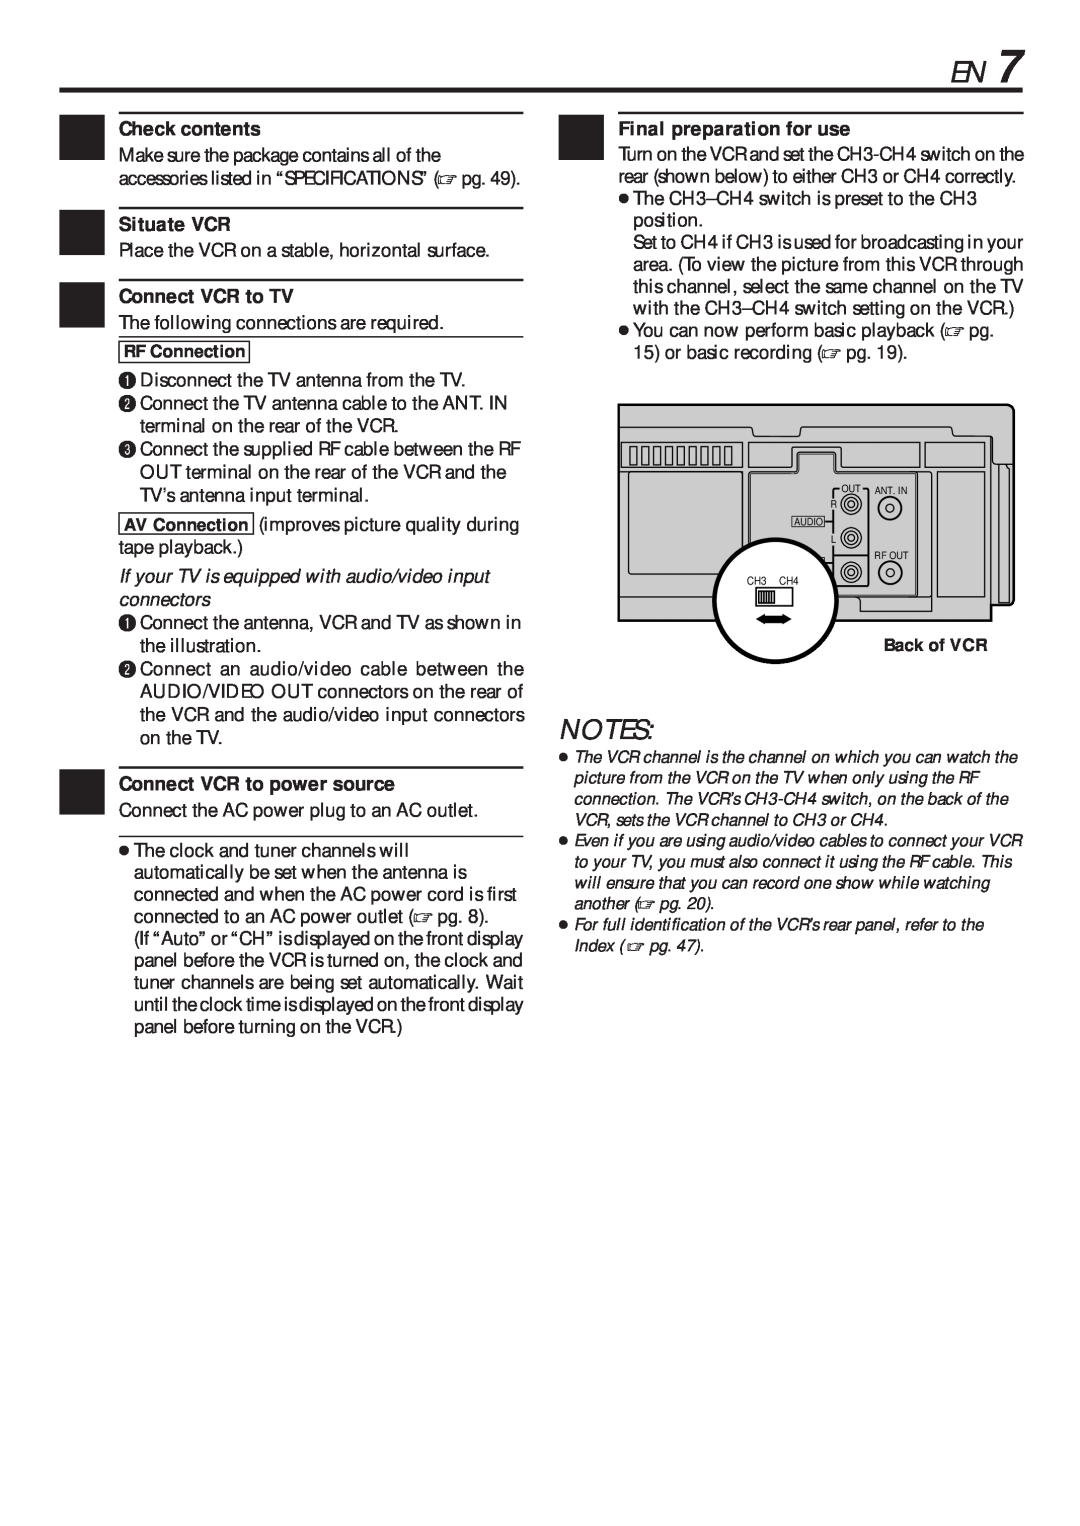 JVC HR-VP682U manual Check contents, Situate VCR, Connect VCR to TV, Final preparation for use 